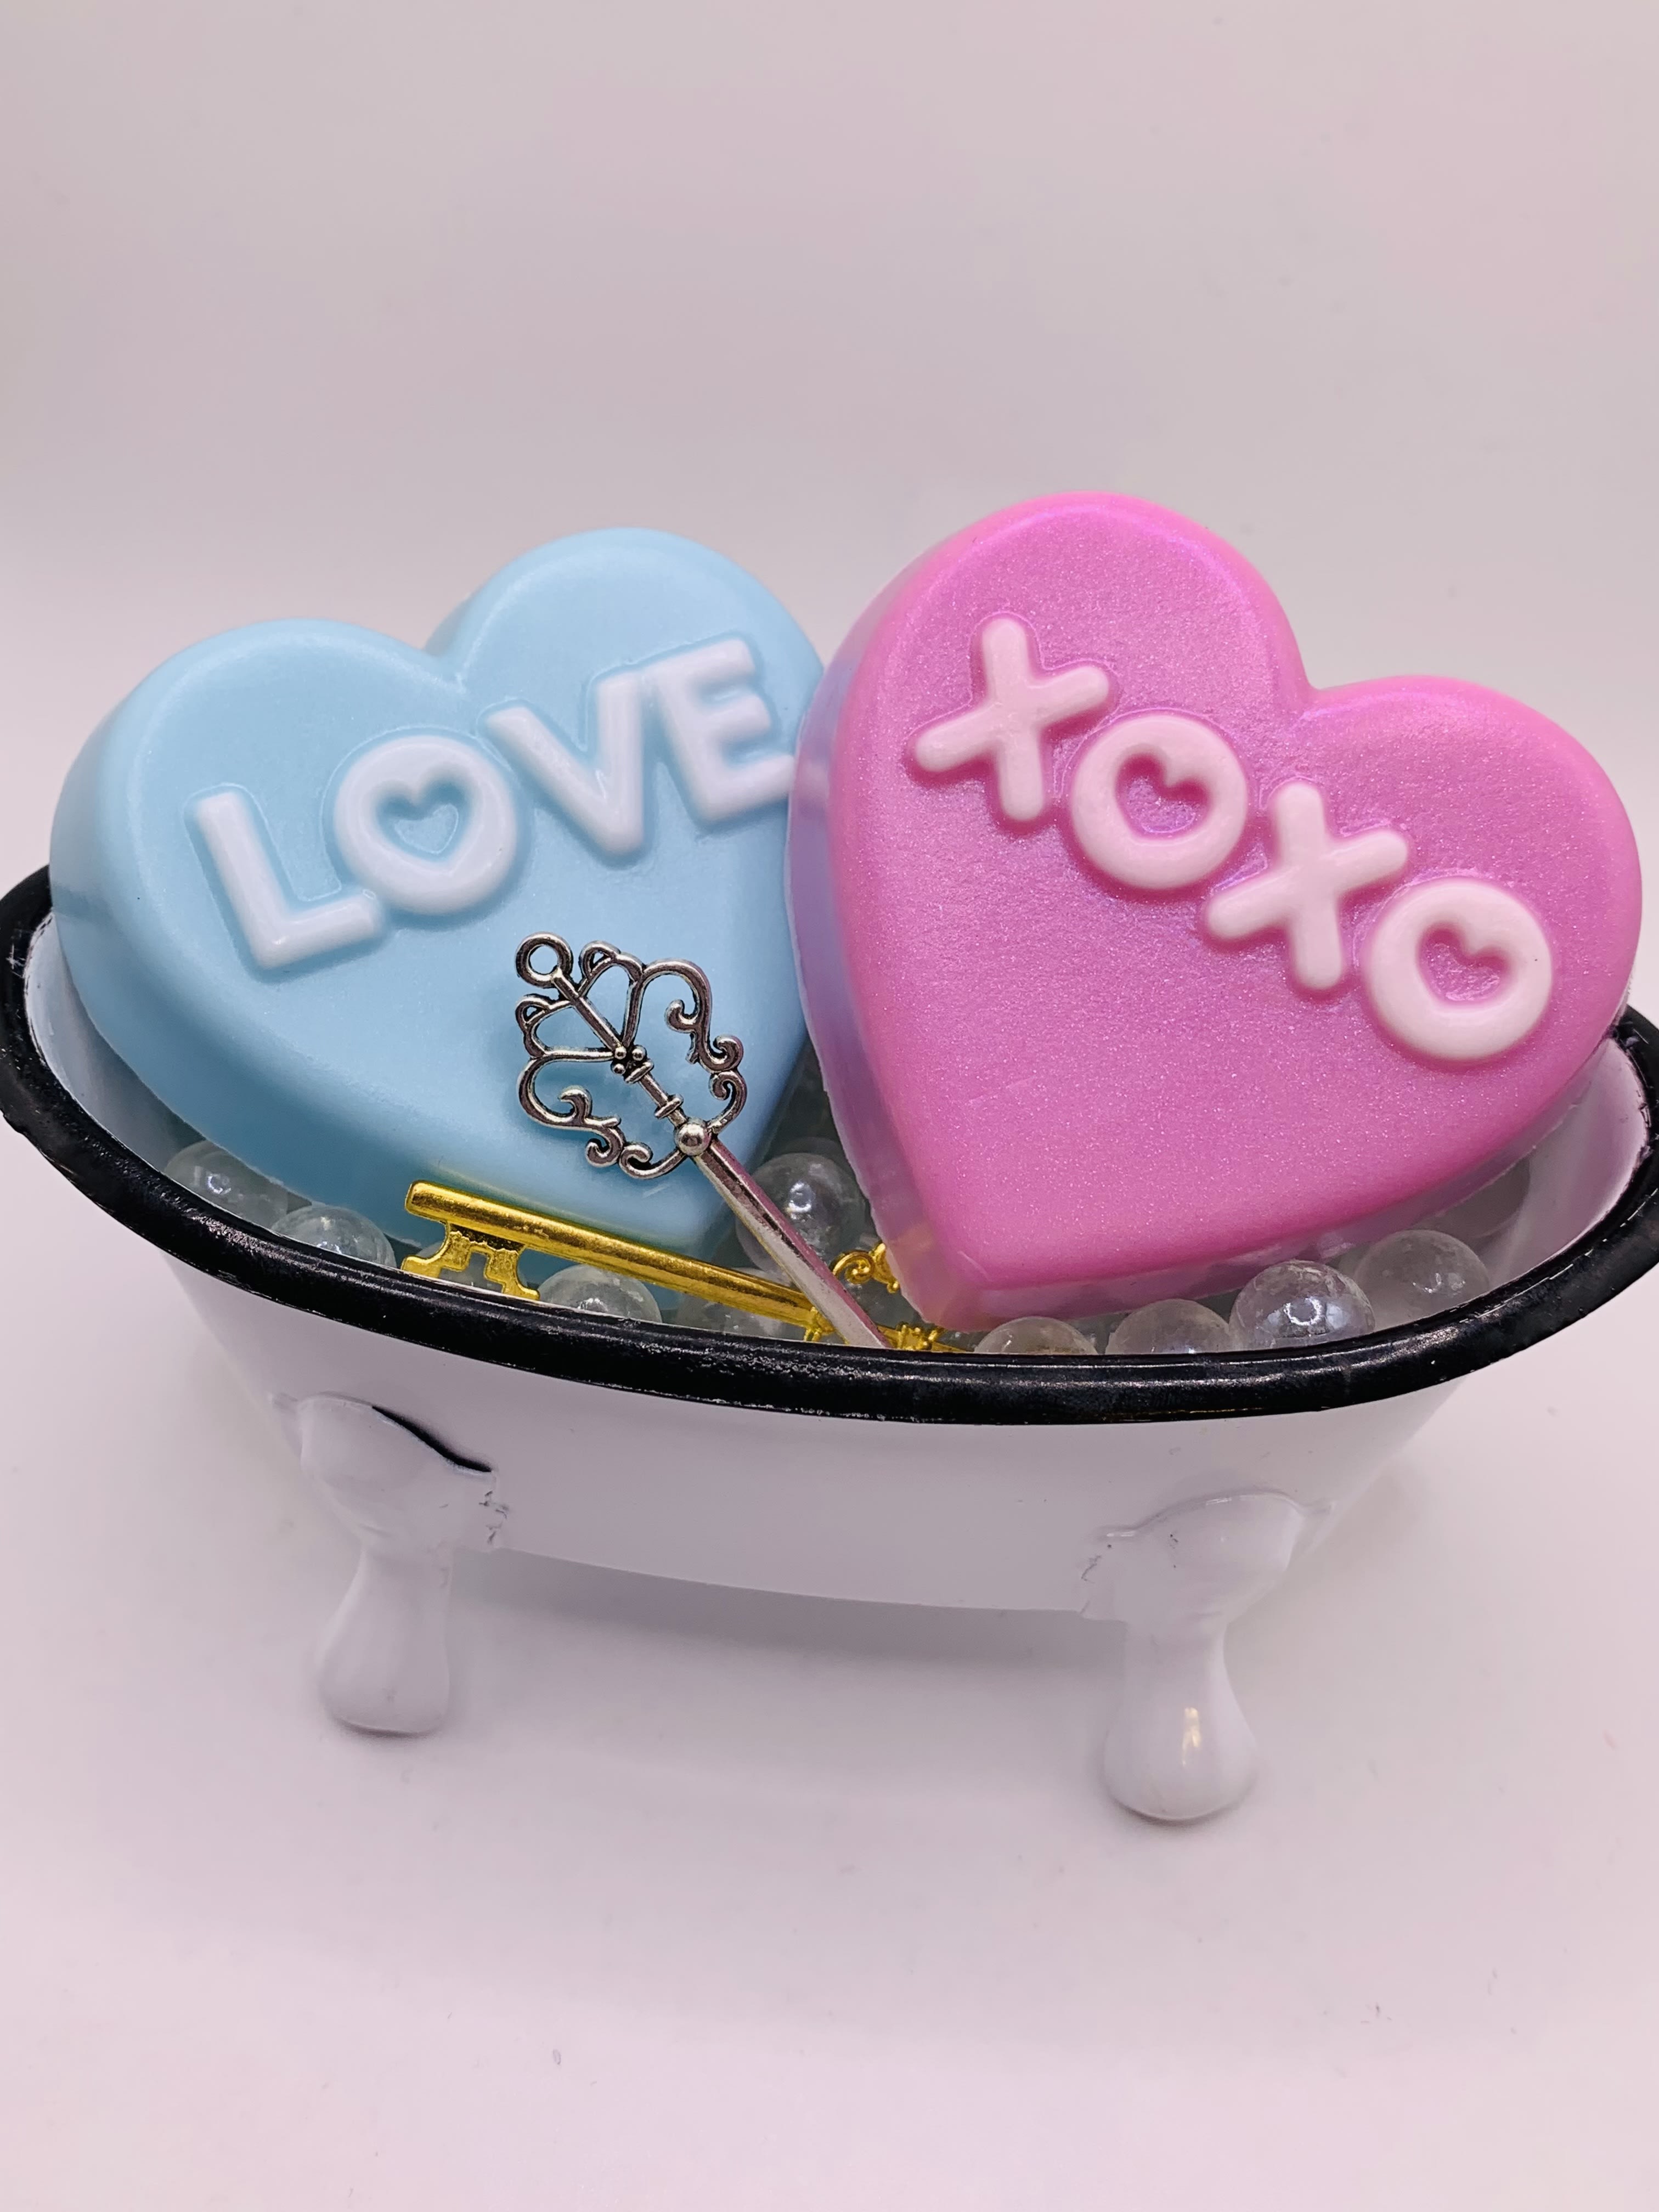 Love & Xoxo soap set - 2 blues - Valentines Day soaps - Soaps by Kristy |  Bath & Shower Products in Scotia, NY